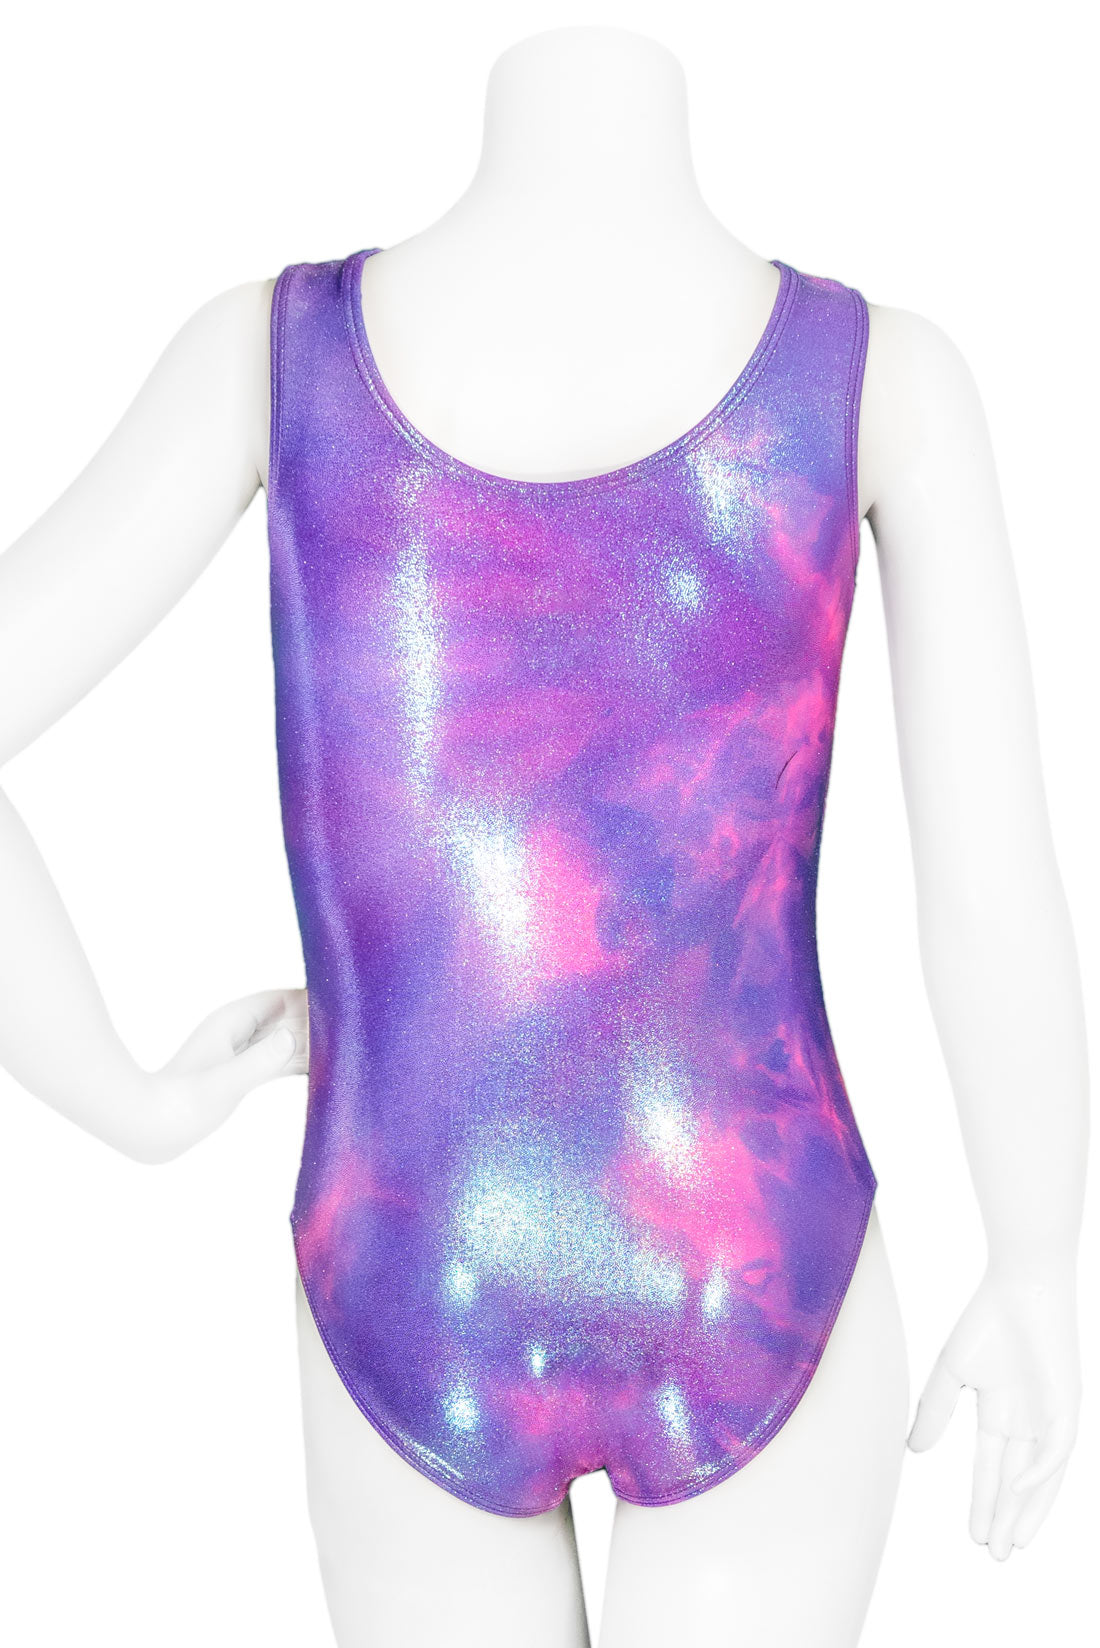 Pink and purple back of a kids gymnastics leotard made from tie dye mystique fabric by Destira, 2023